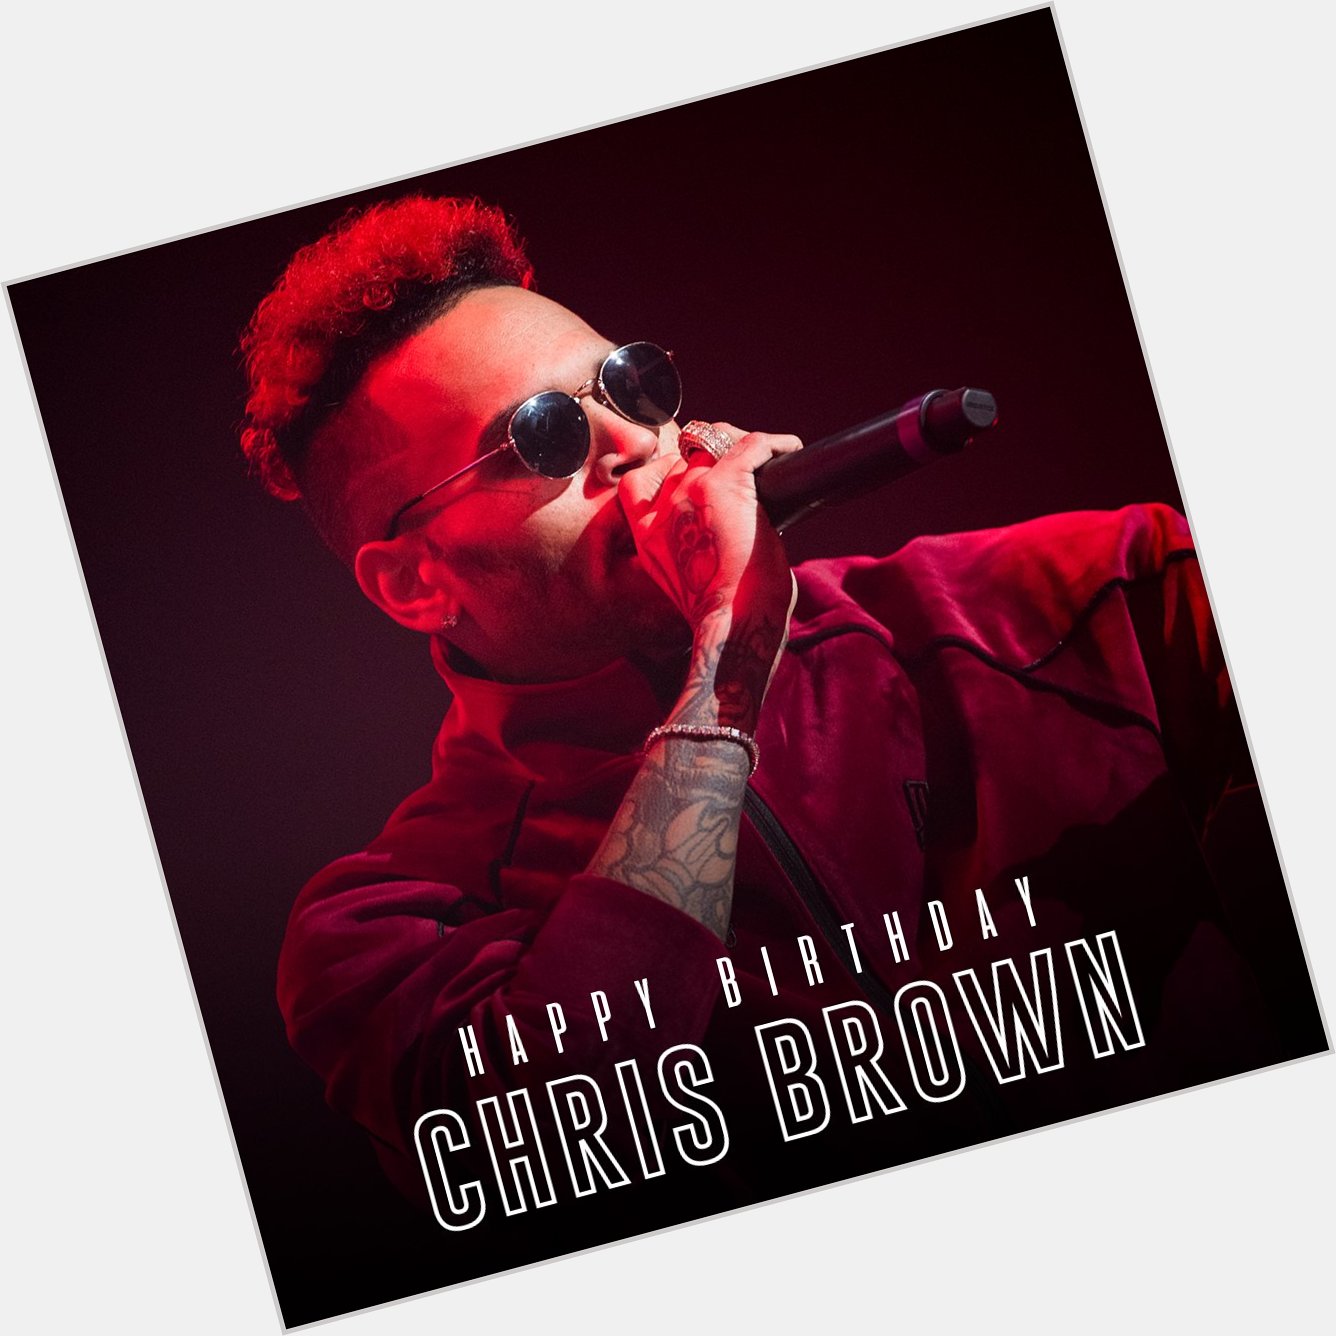 Happy Birthday Chris Brown.  Don\t miss him here on June 22. Tickets available here  